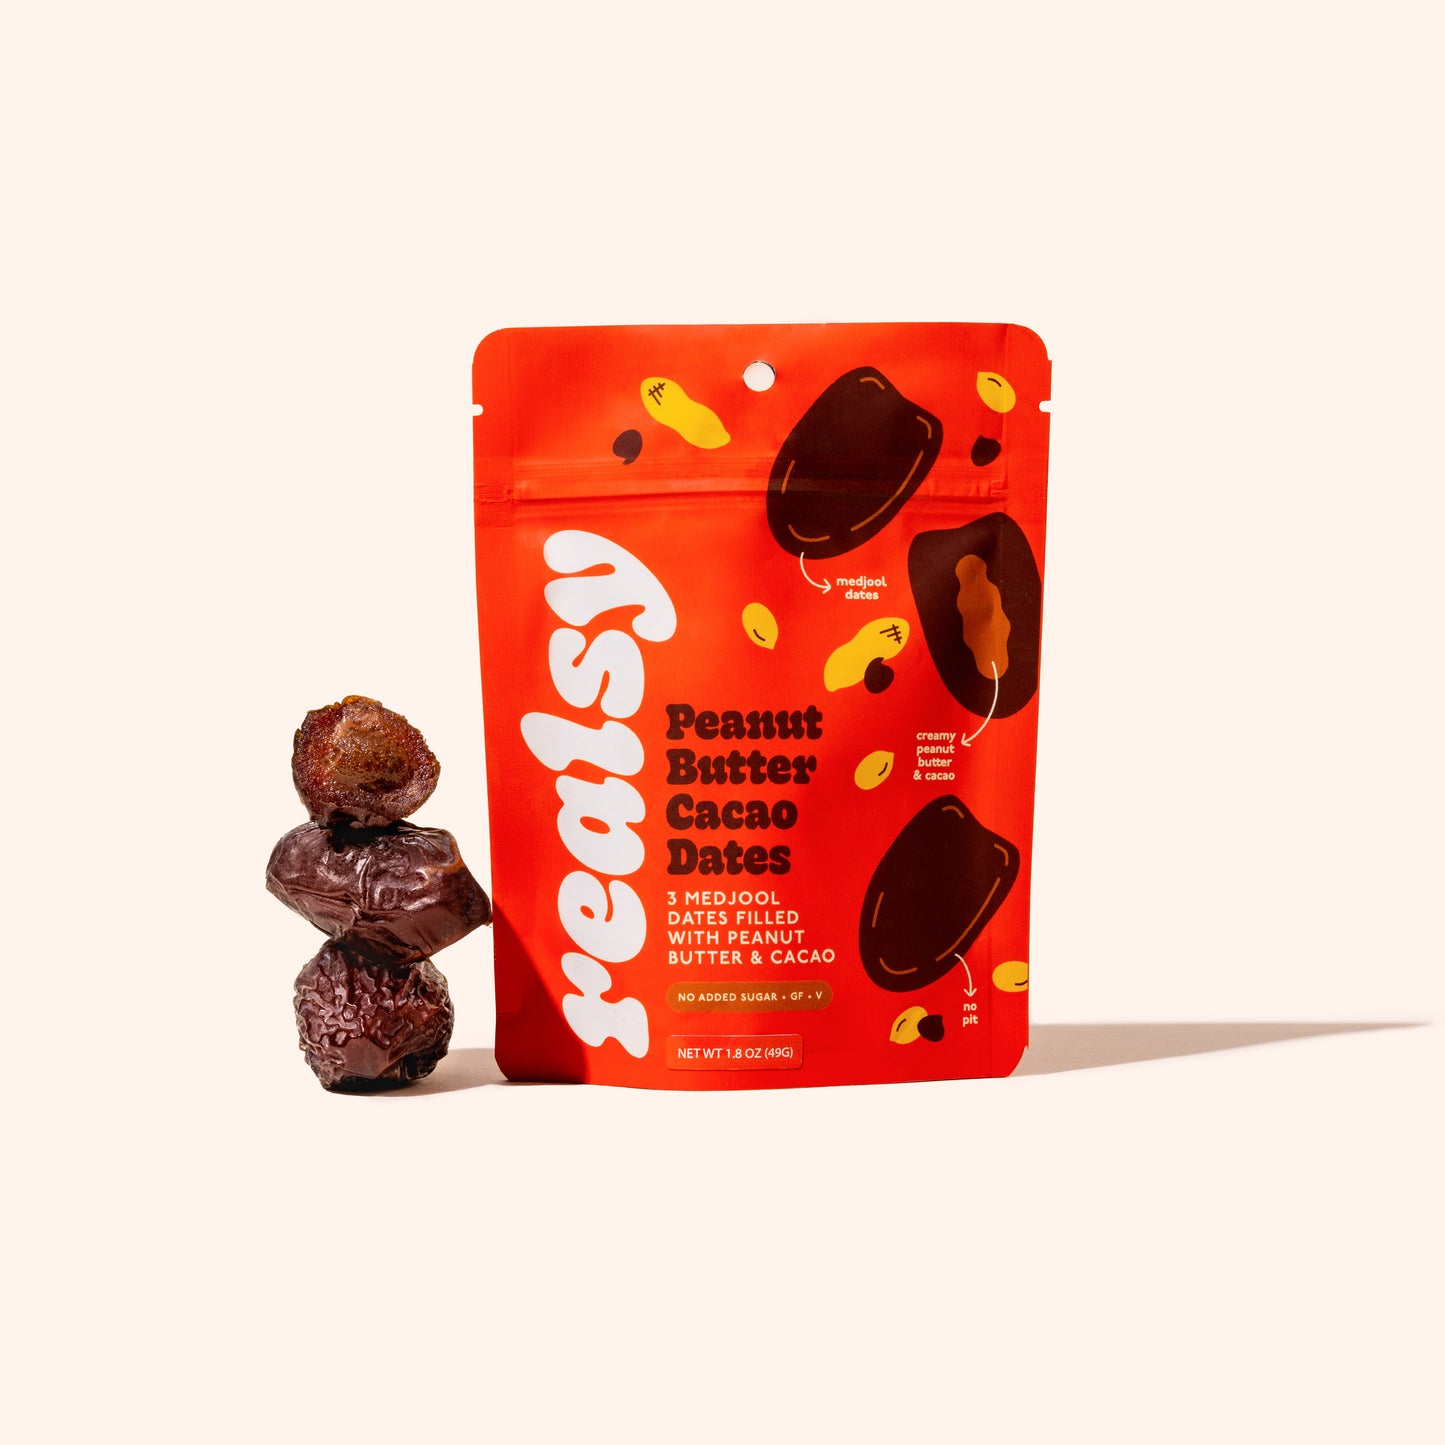 Cacao Peanut Butter Dates (10 pack)